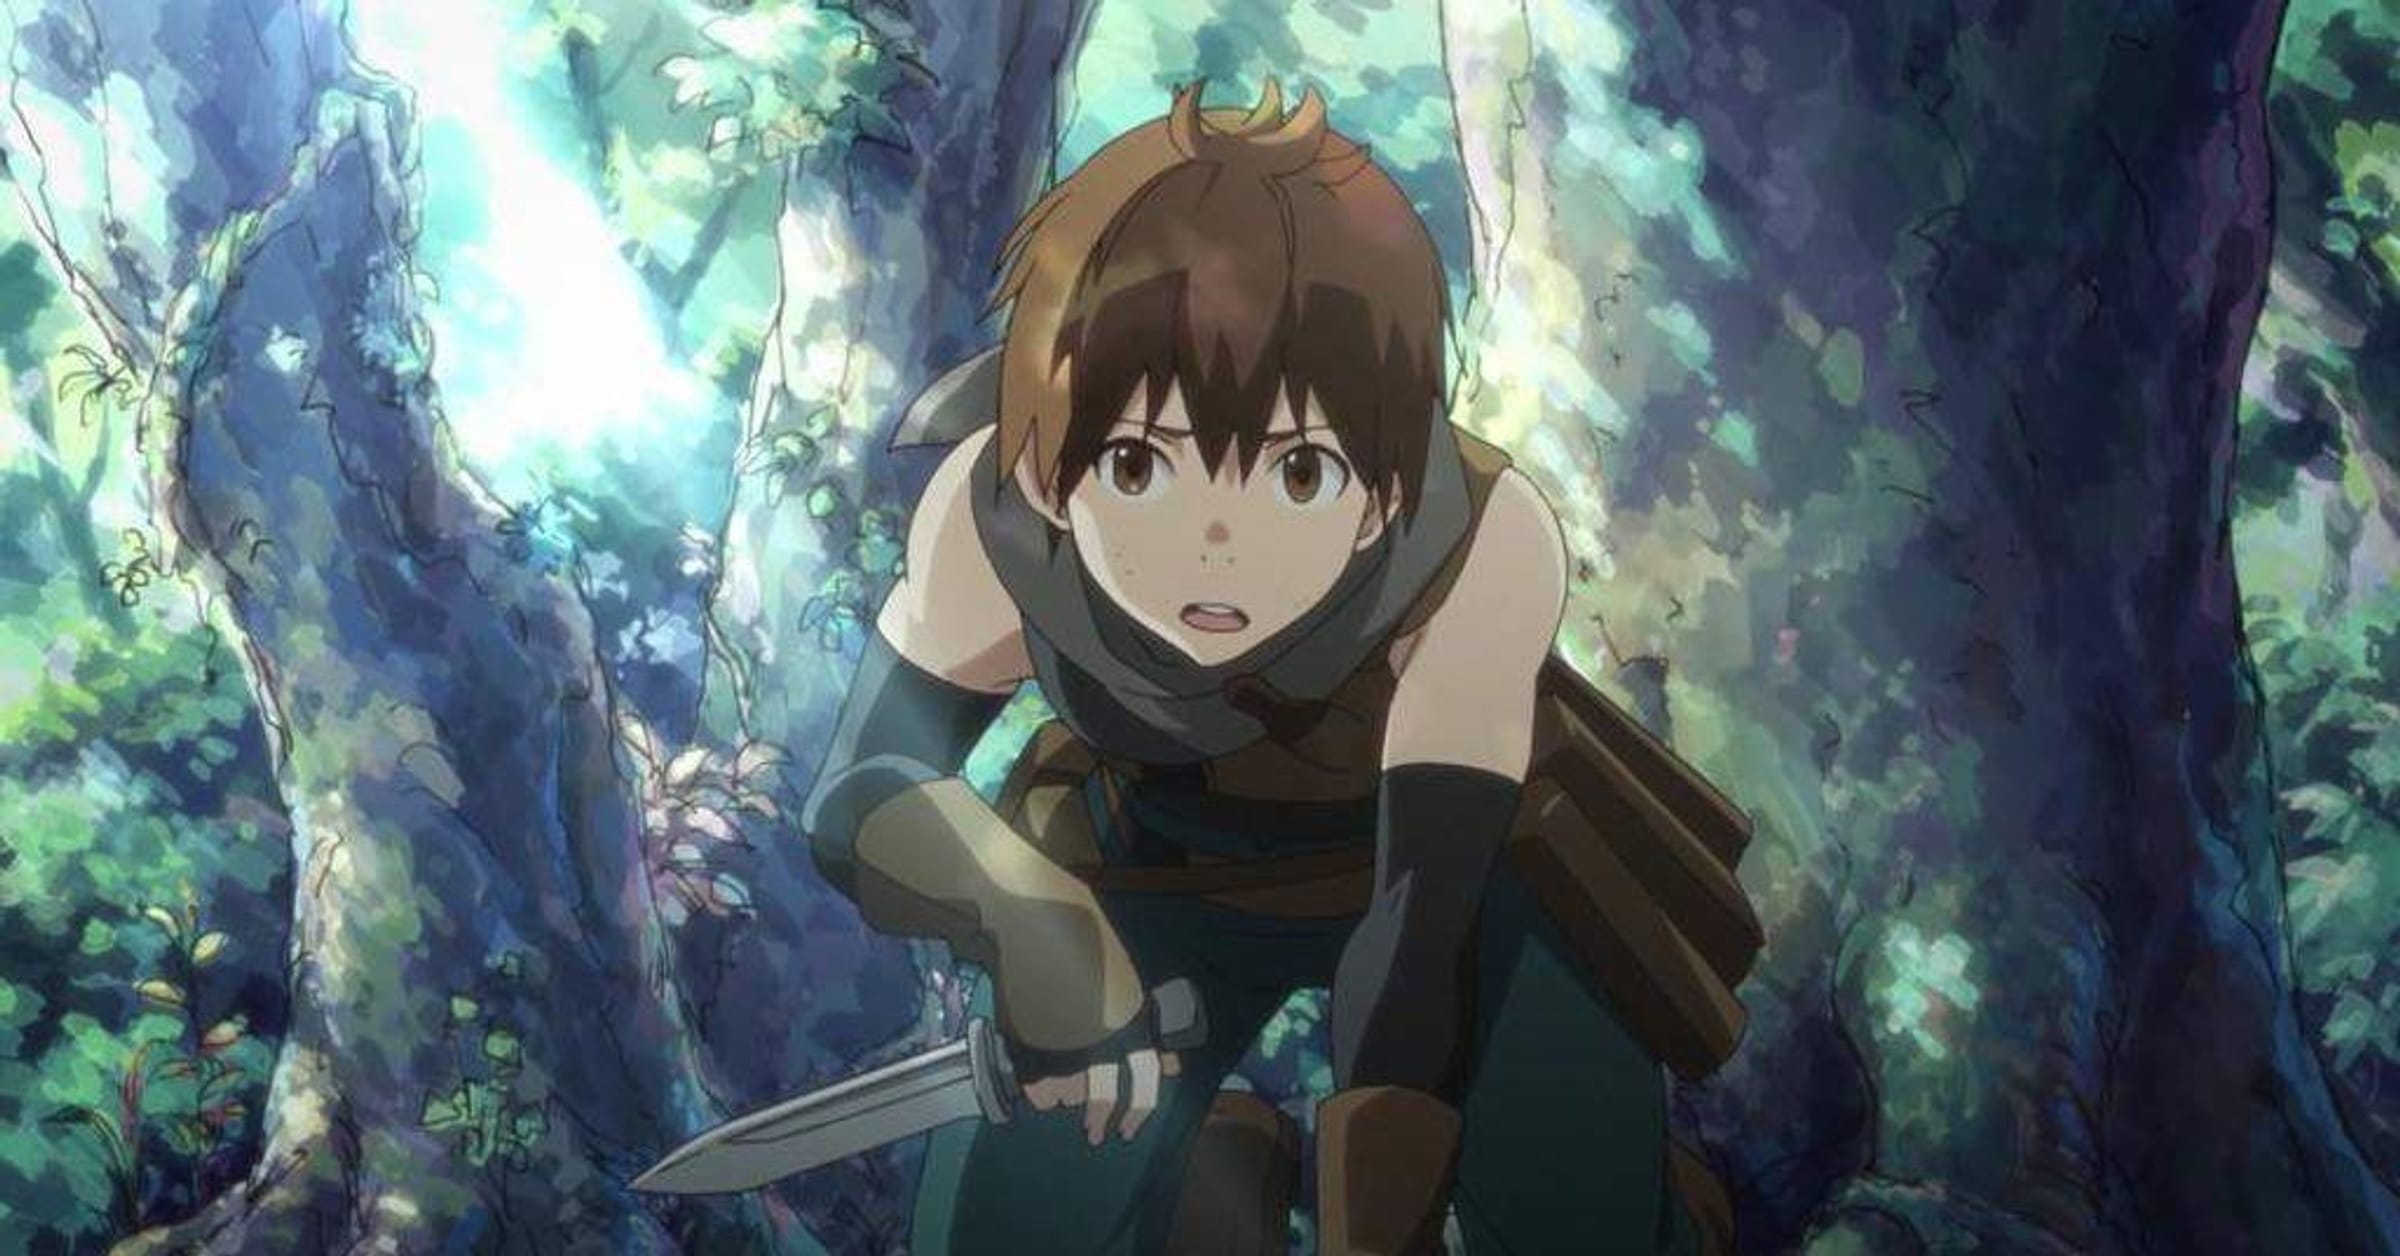 Top Isekai Anime where the Protagonist isn't overpowered! 1. Grimgar